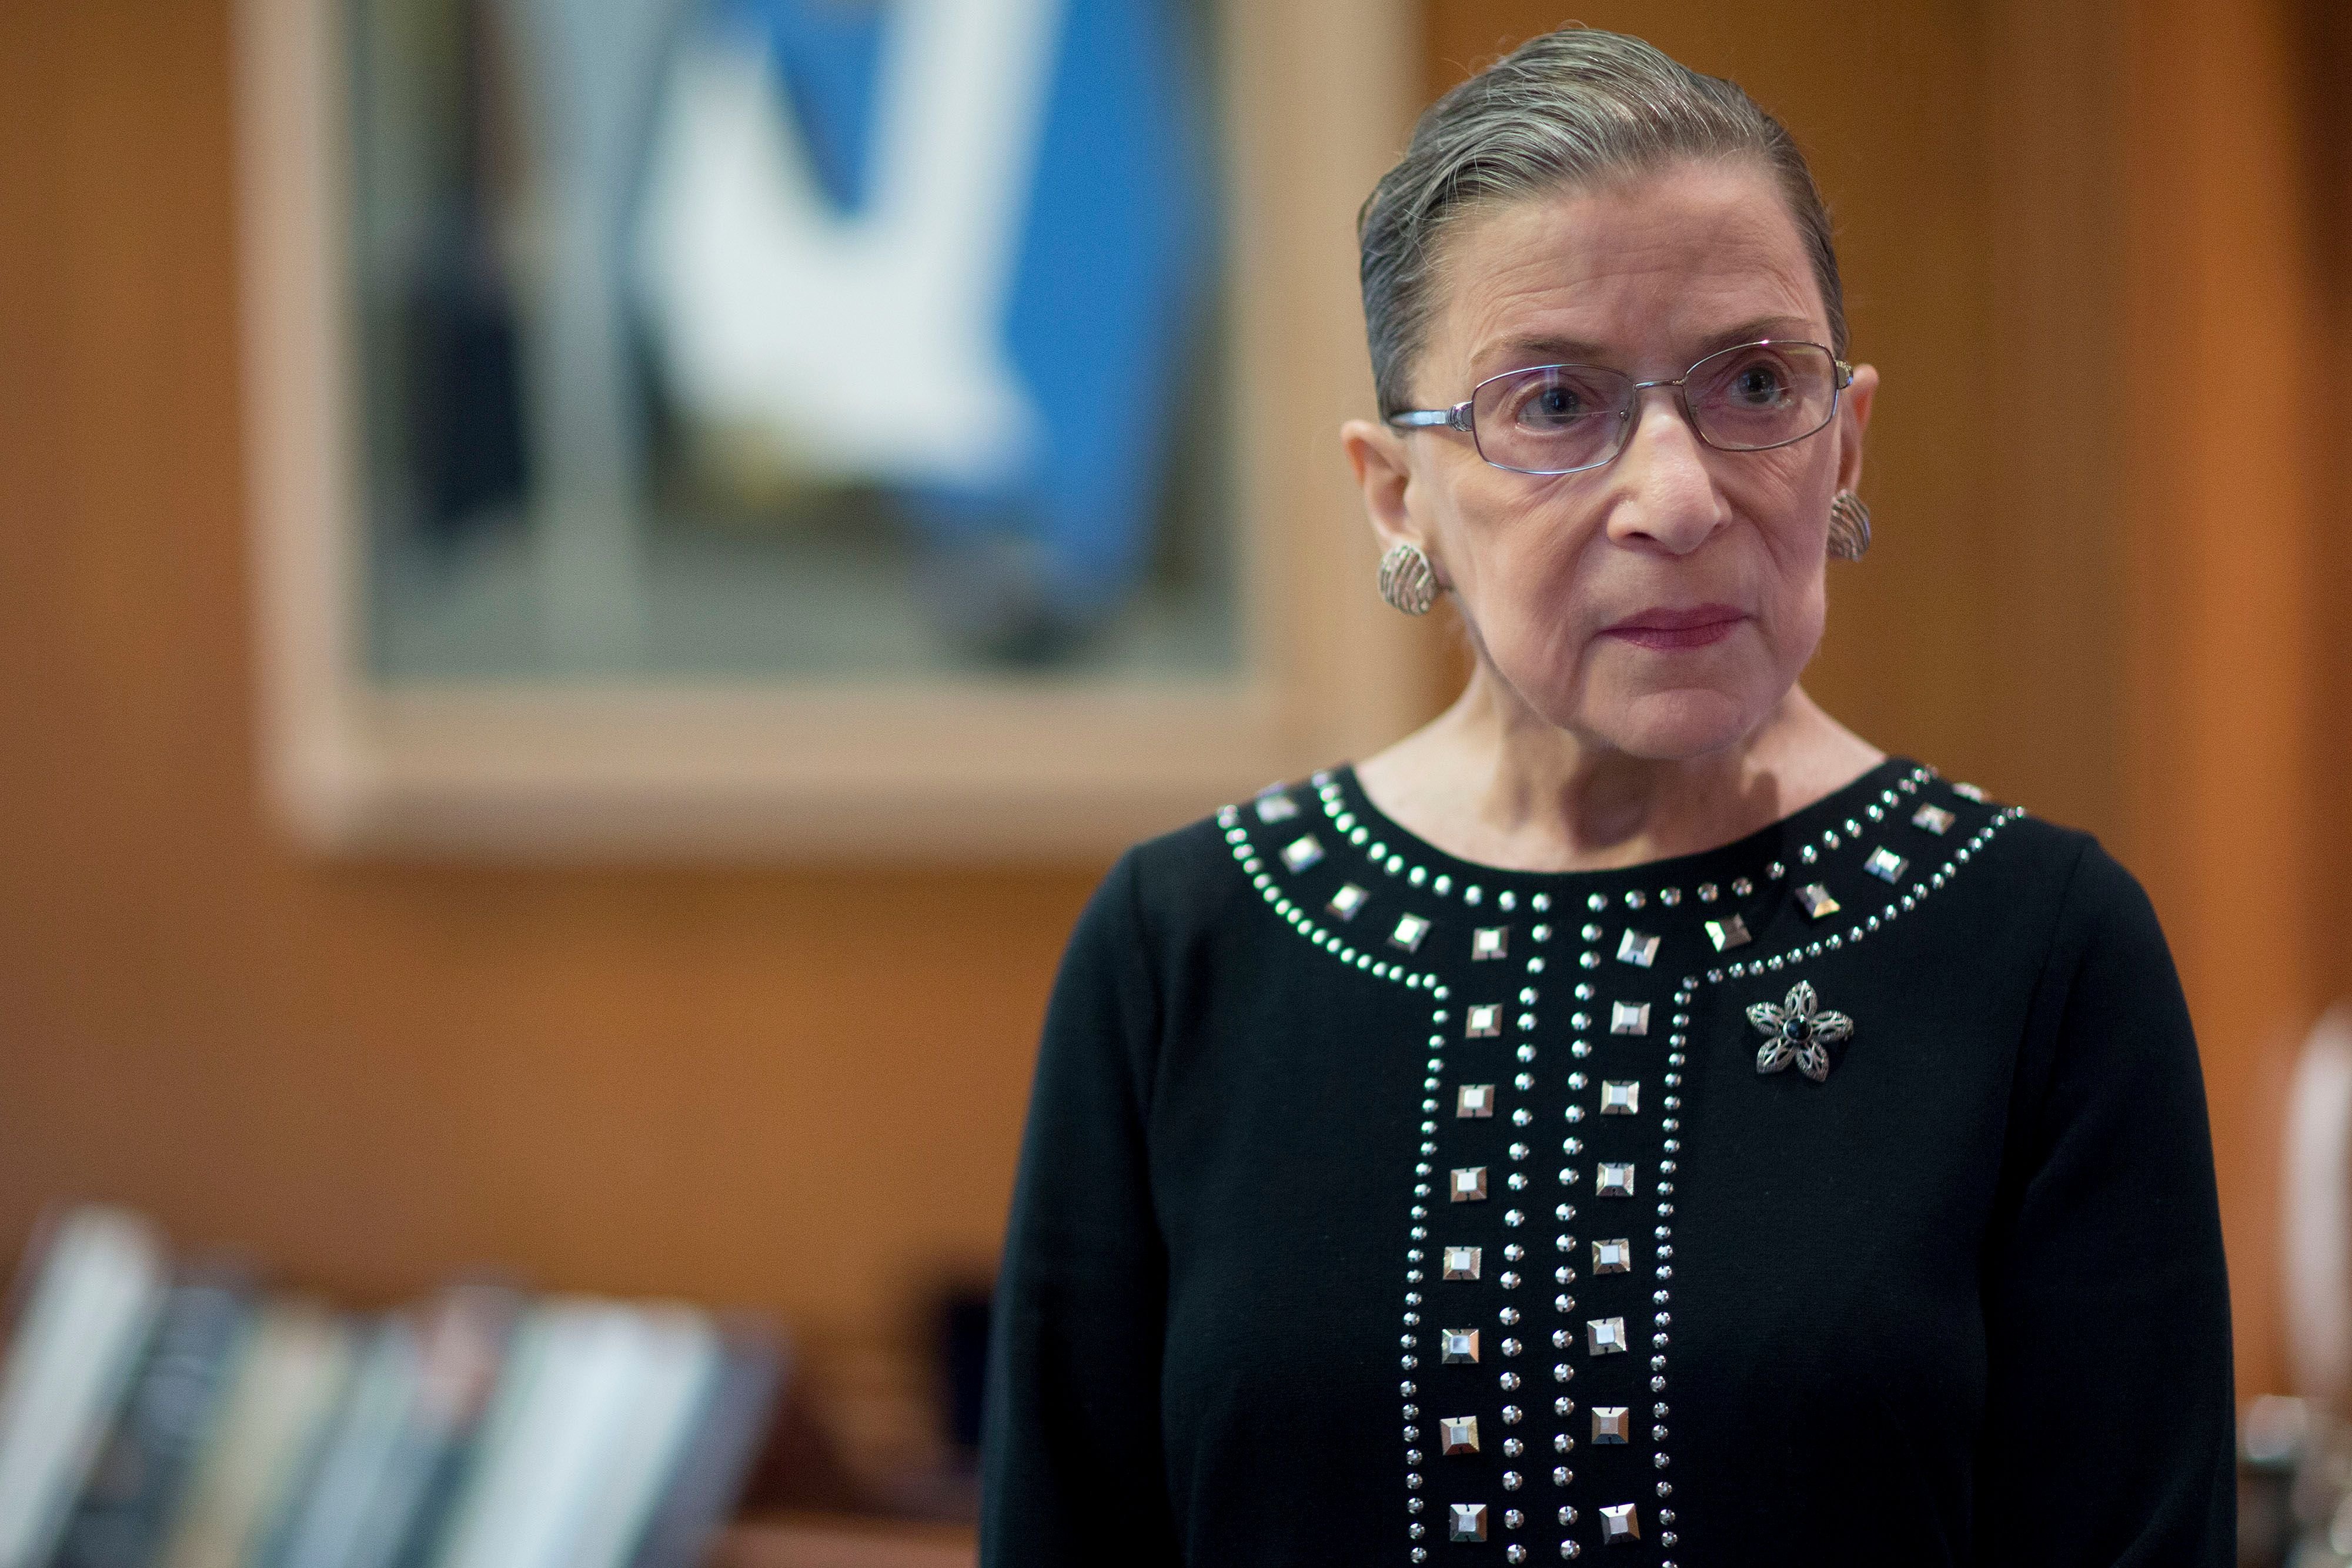 Ruth Bader Ginsburg after an interview in Washington, D.C. on August 23, 2013. | Photo: Getty Images